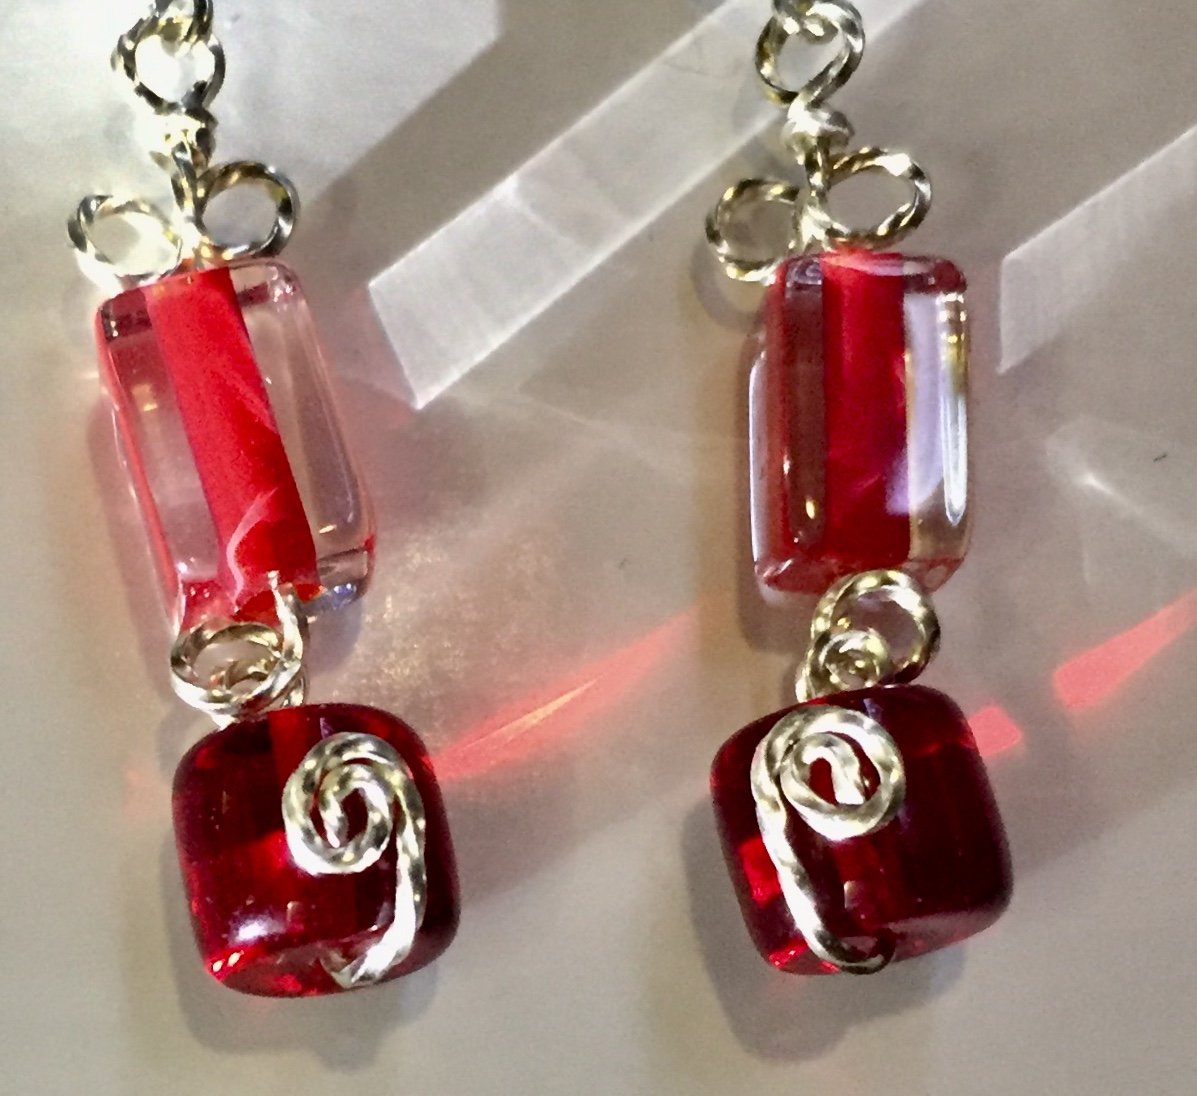 Red glass beads form geometric patterns in rectangles and cylinders, with swirly silver wire looped in between on these leverback silver earrings.